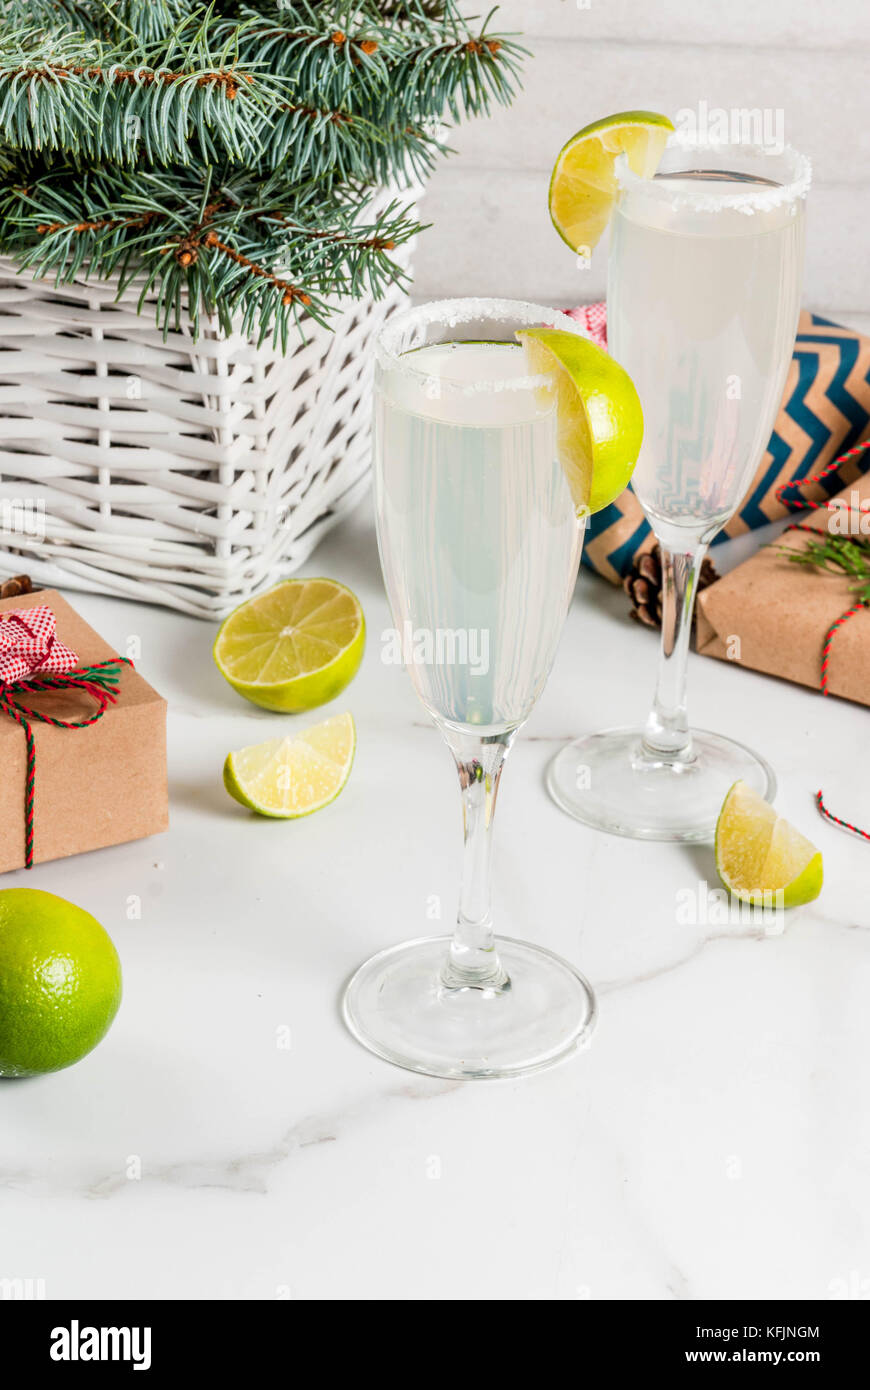 Ideas For Christmas And New Year Drinks Champagne Margarita Stock Photo Alamy